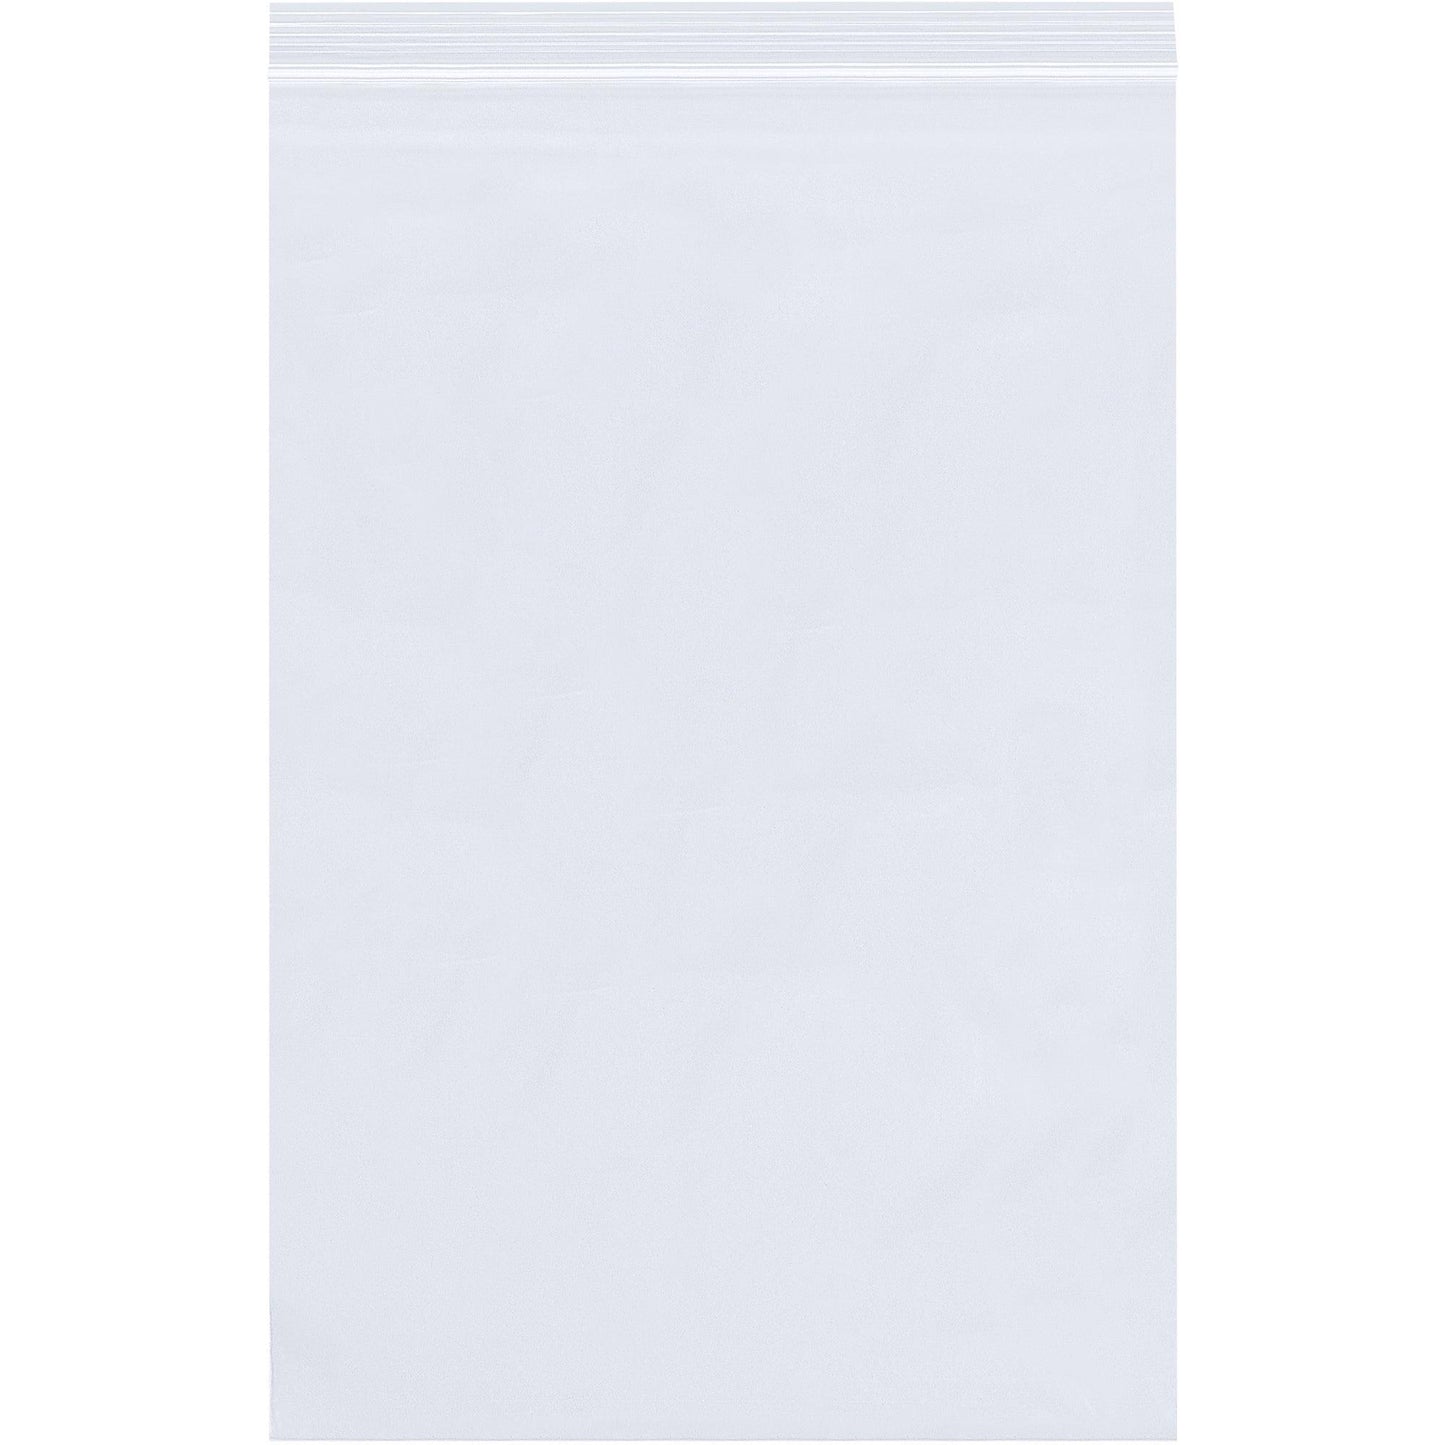 10 x 12" - 4 Mil Reclosable Poly Bags - PB3775